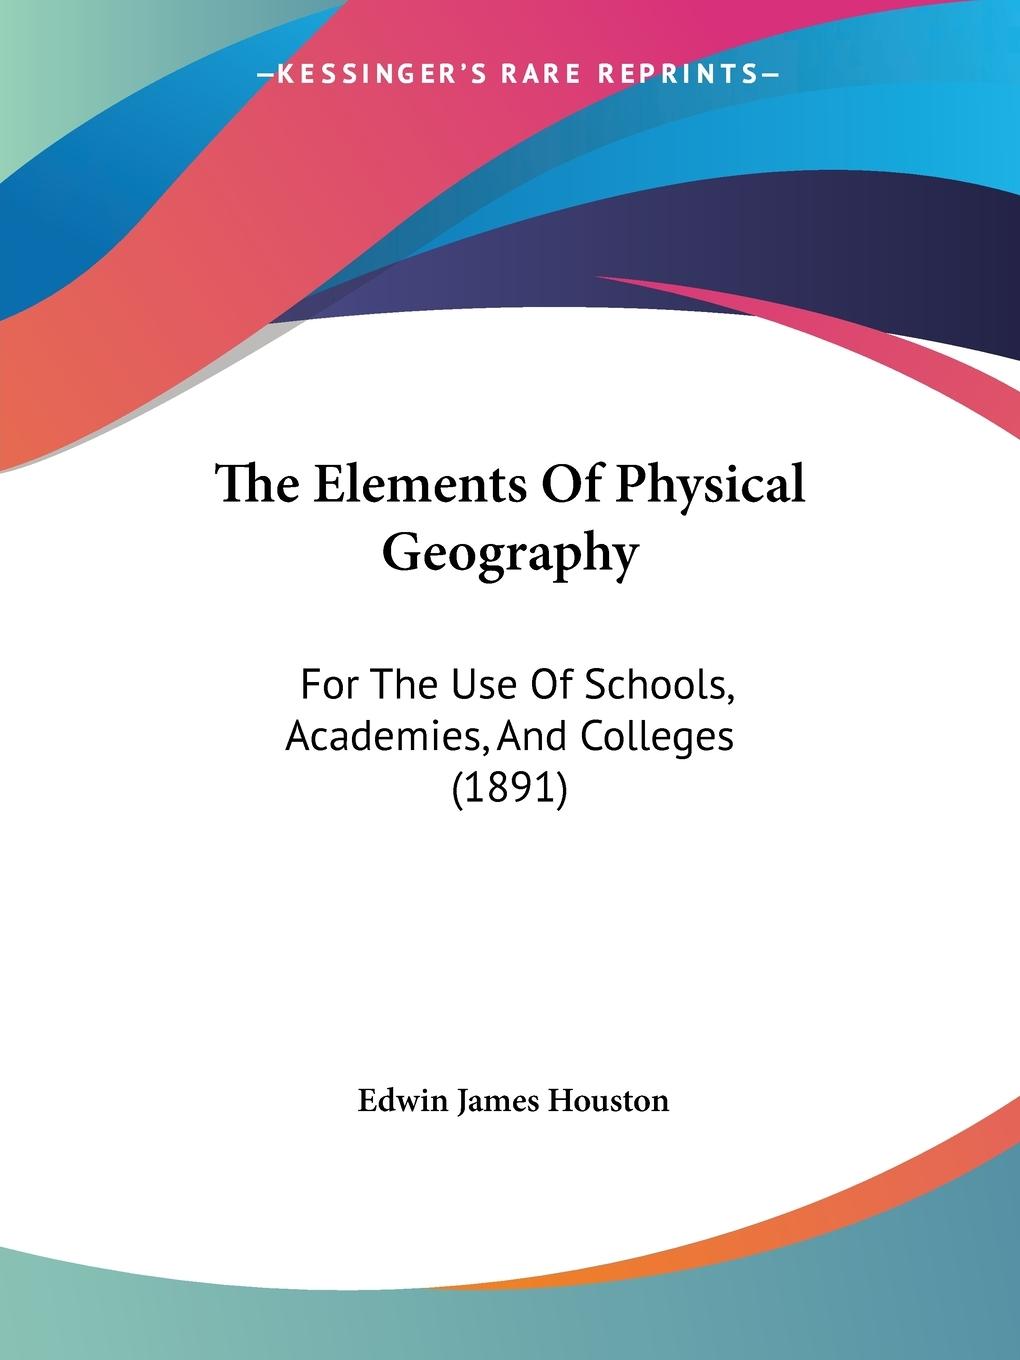 The Elements Of Physical Geography - Houston, Edwin James